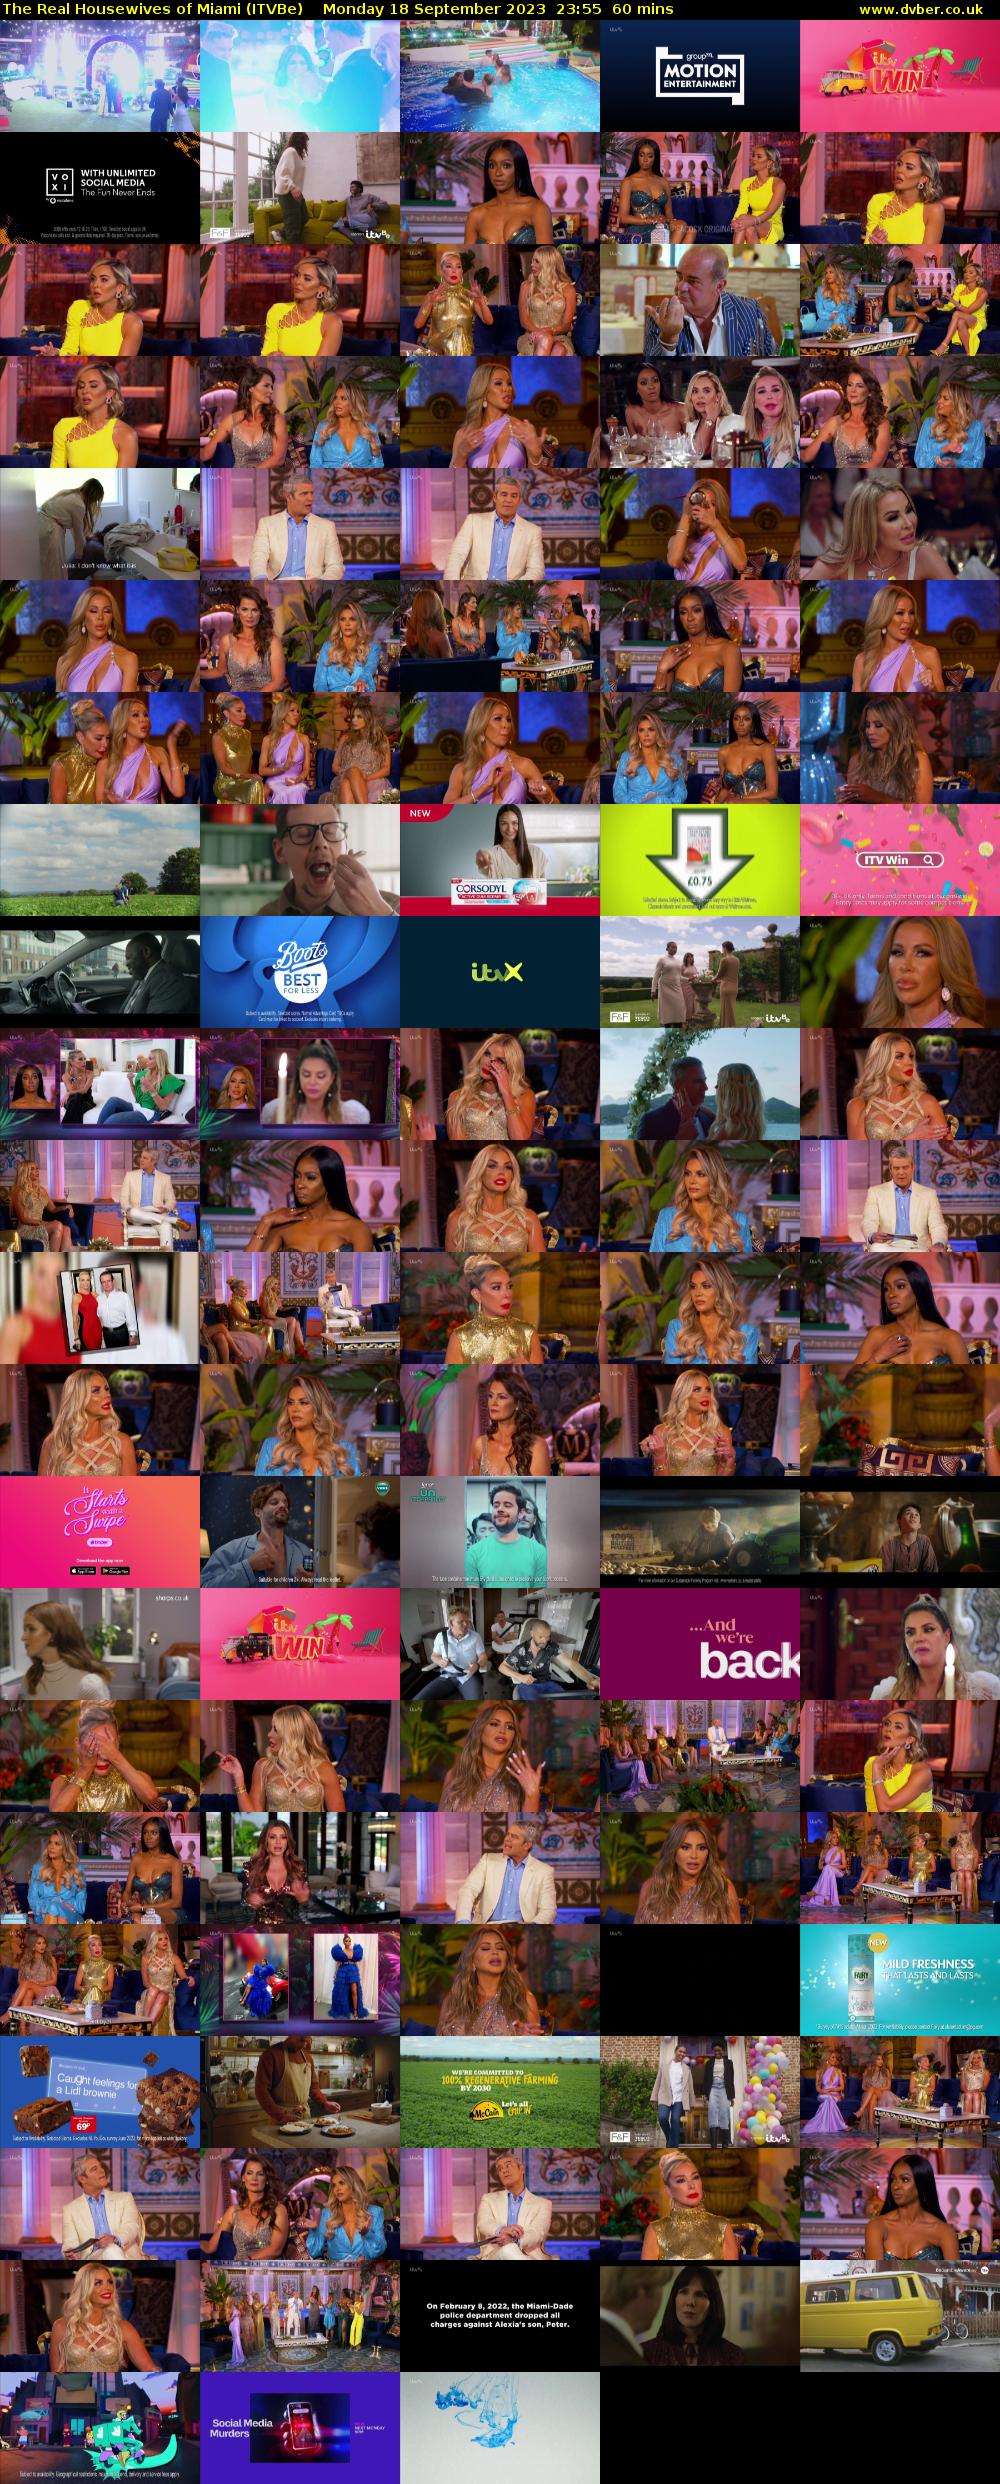 The Real Housewives of Miami (ITVBe) Monday 18 September 2023 23:55 - 00:55